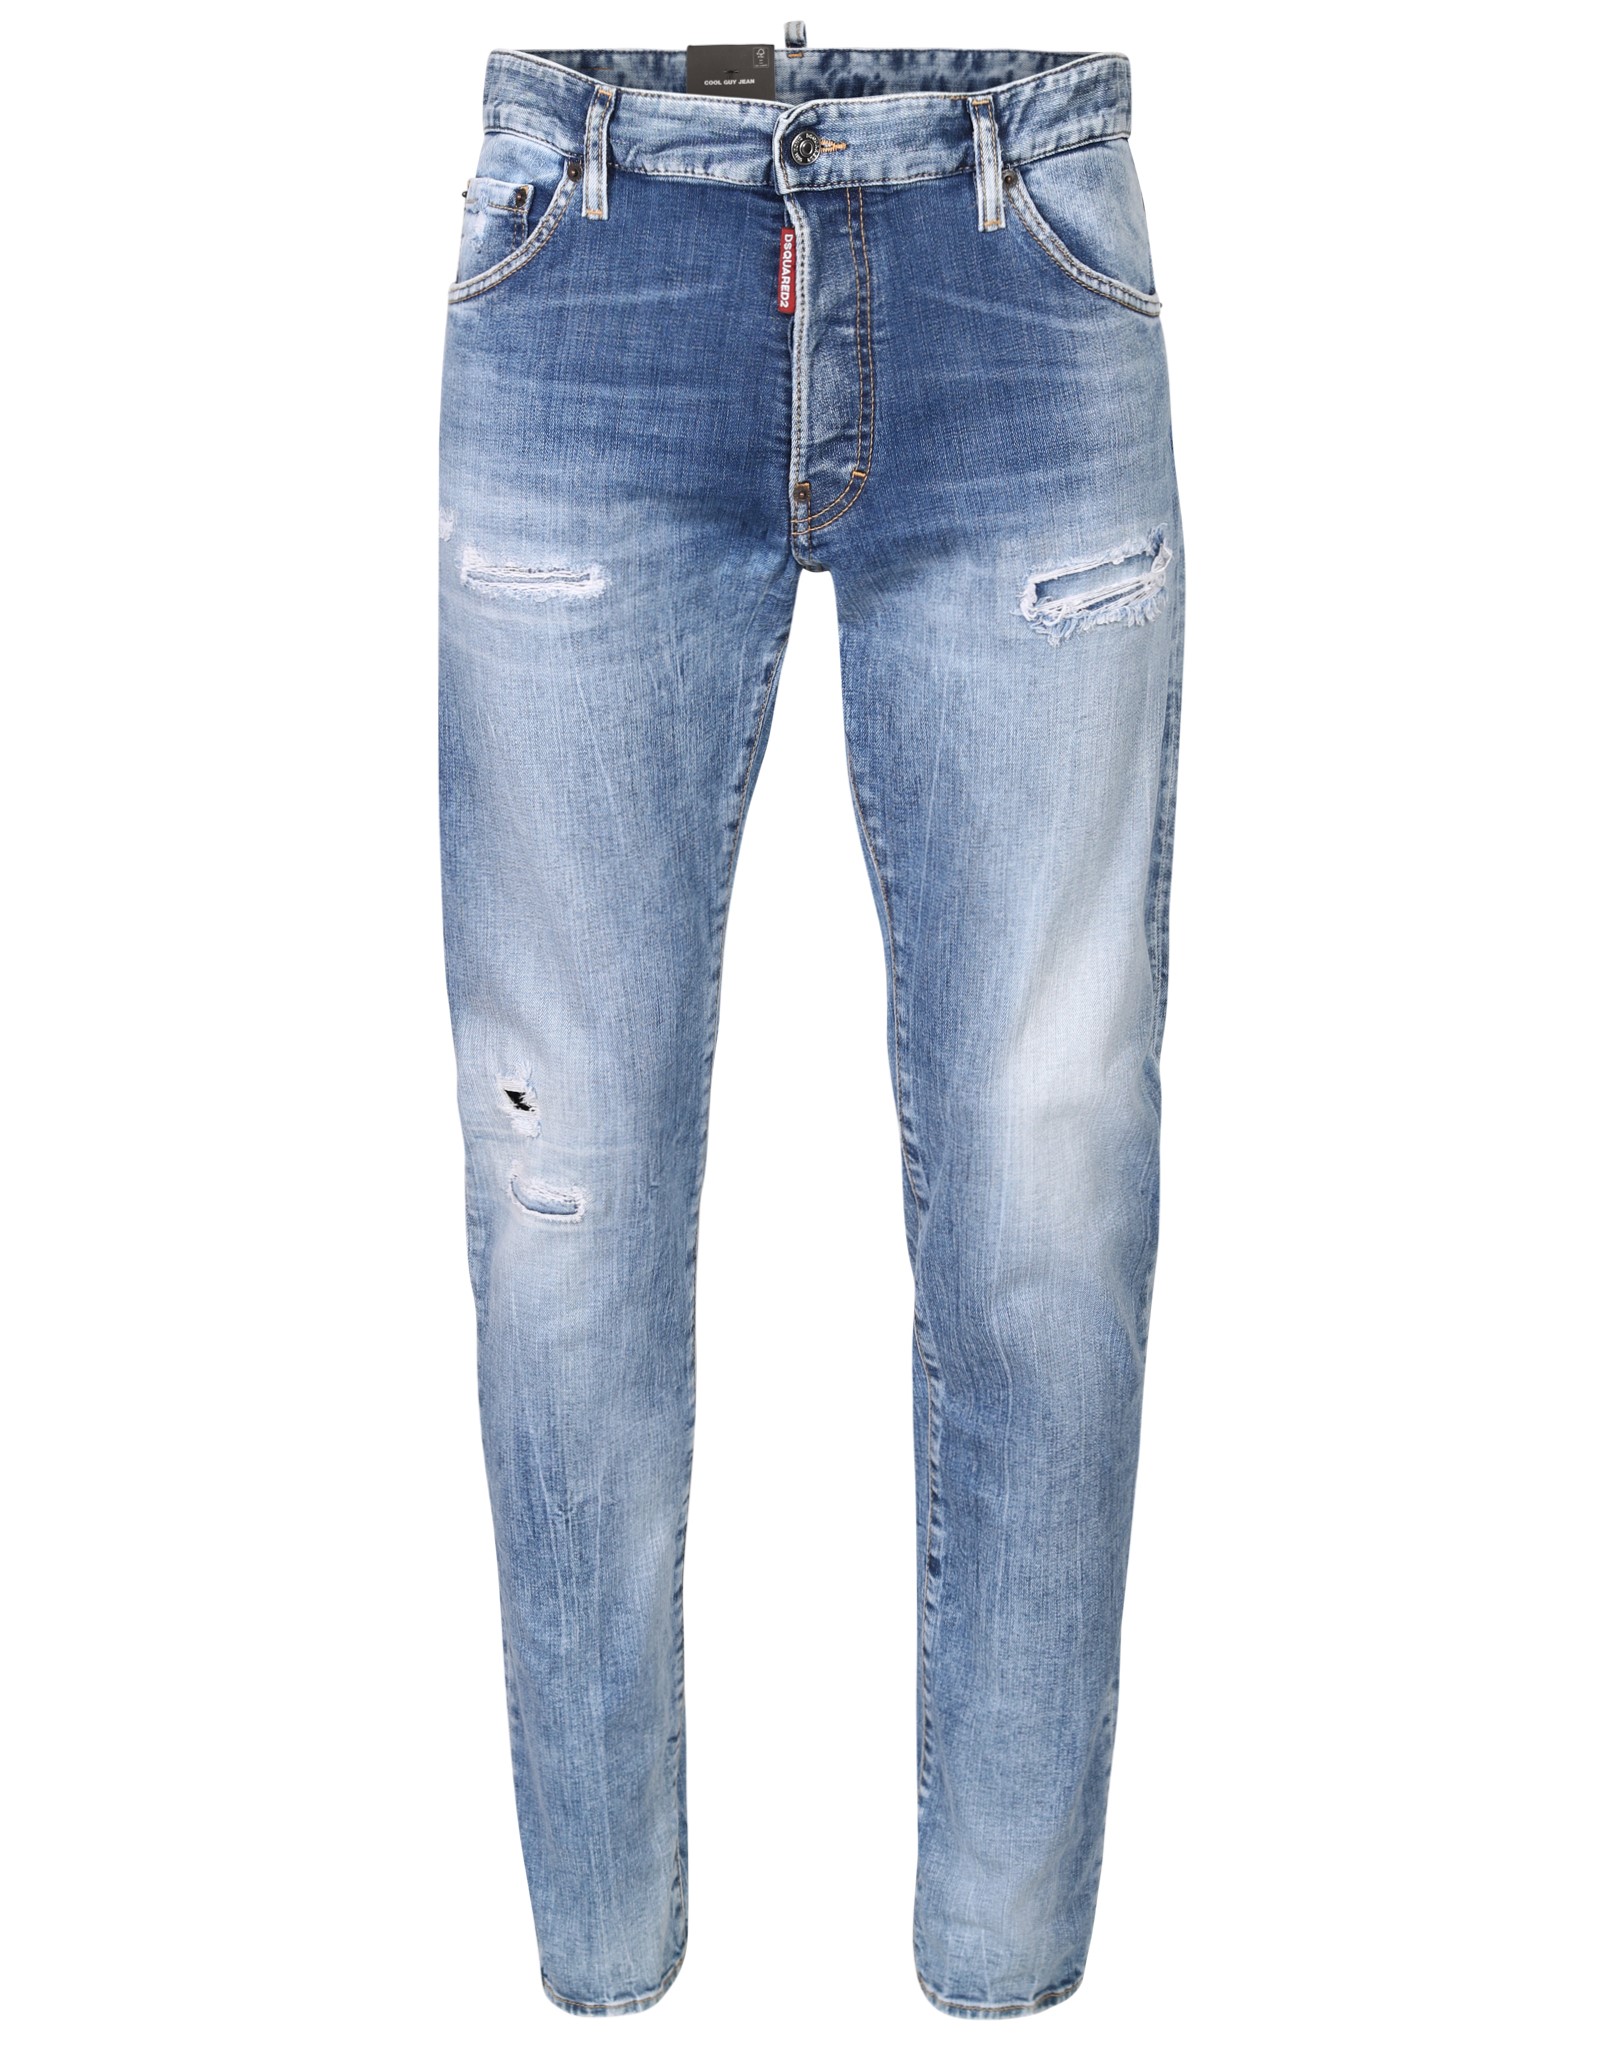 DSQUARED2 Cool Guy Jeans in Light Blue Washing 52